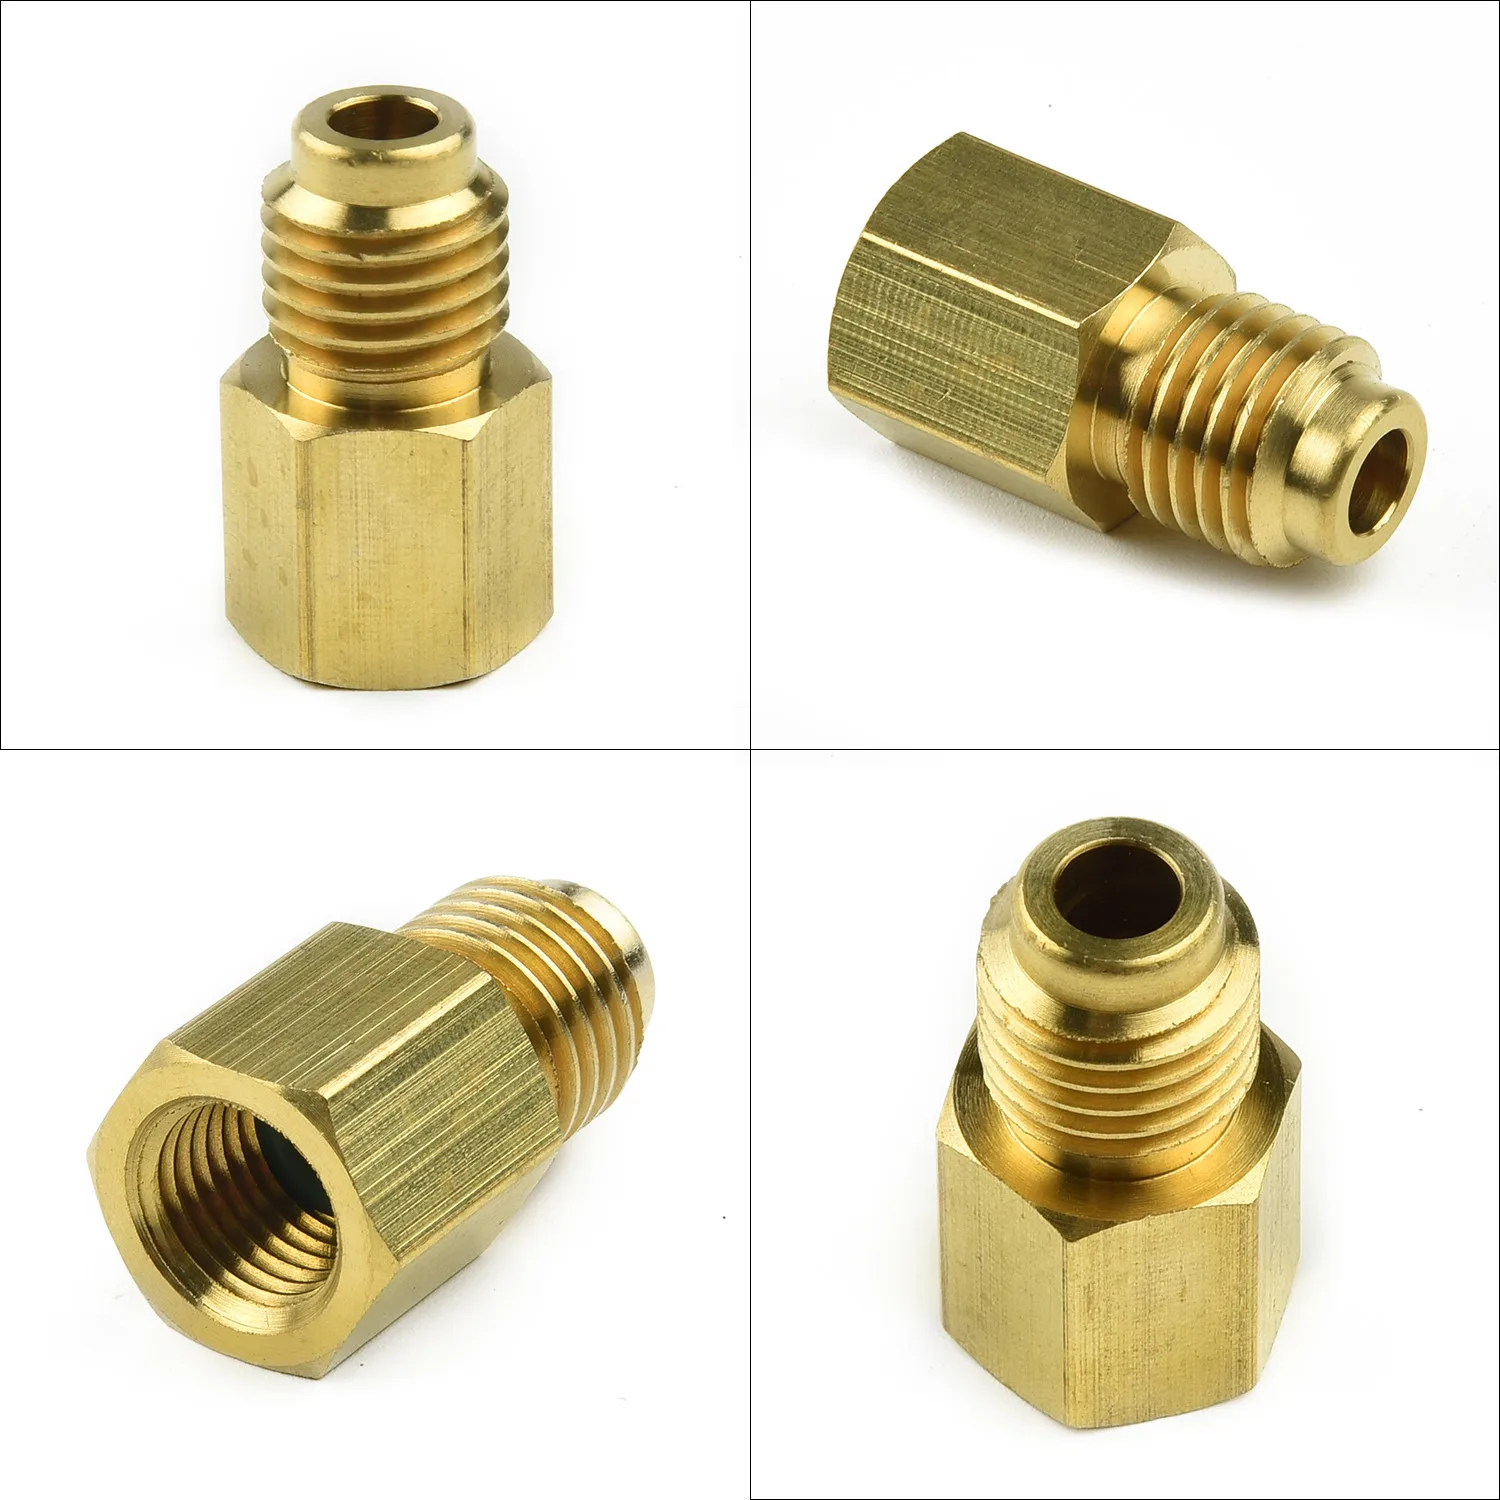 

1pcs R134A Conversion Joint Internal Thread 1/4"external Thread 1/2" Adapter Conditioner Adapter Quick Coupling Accessories